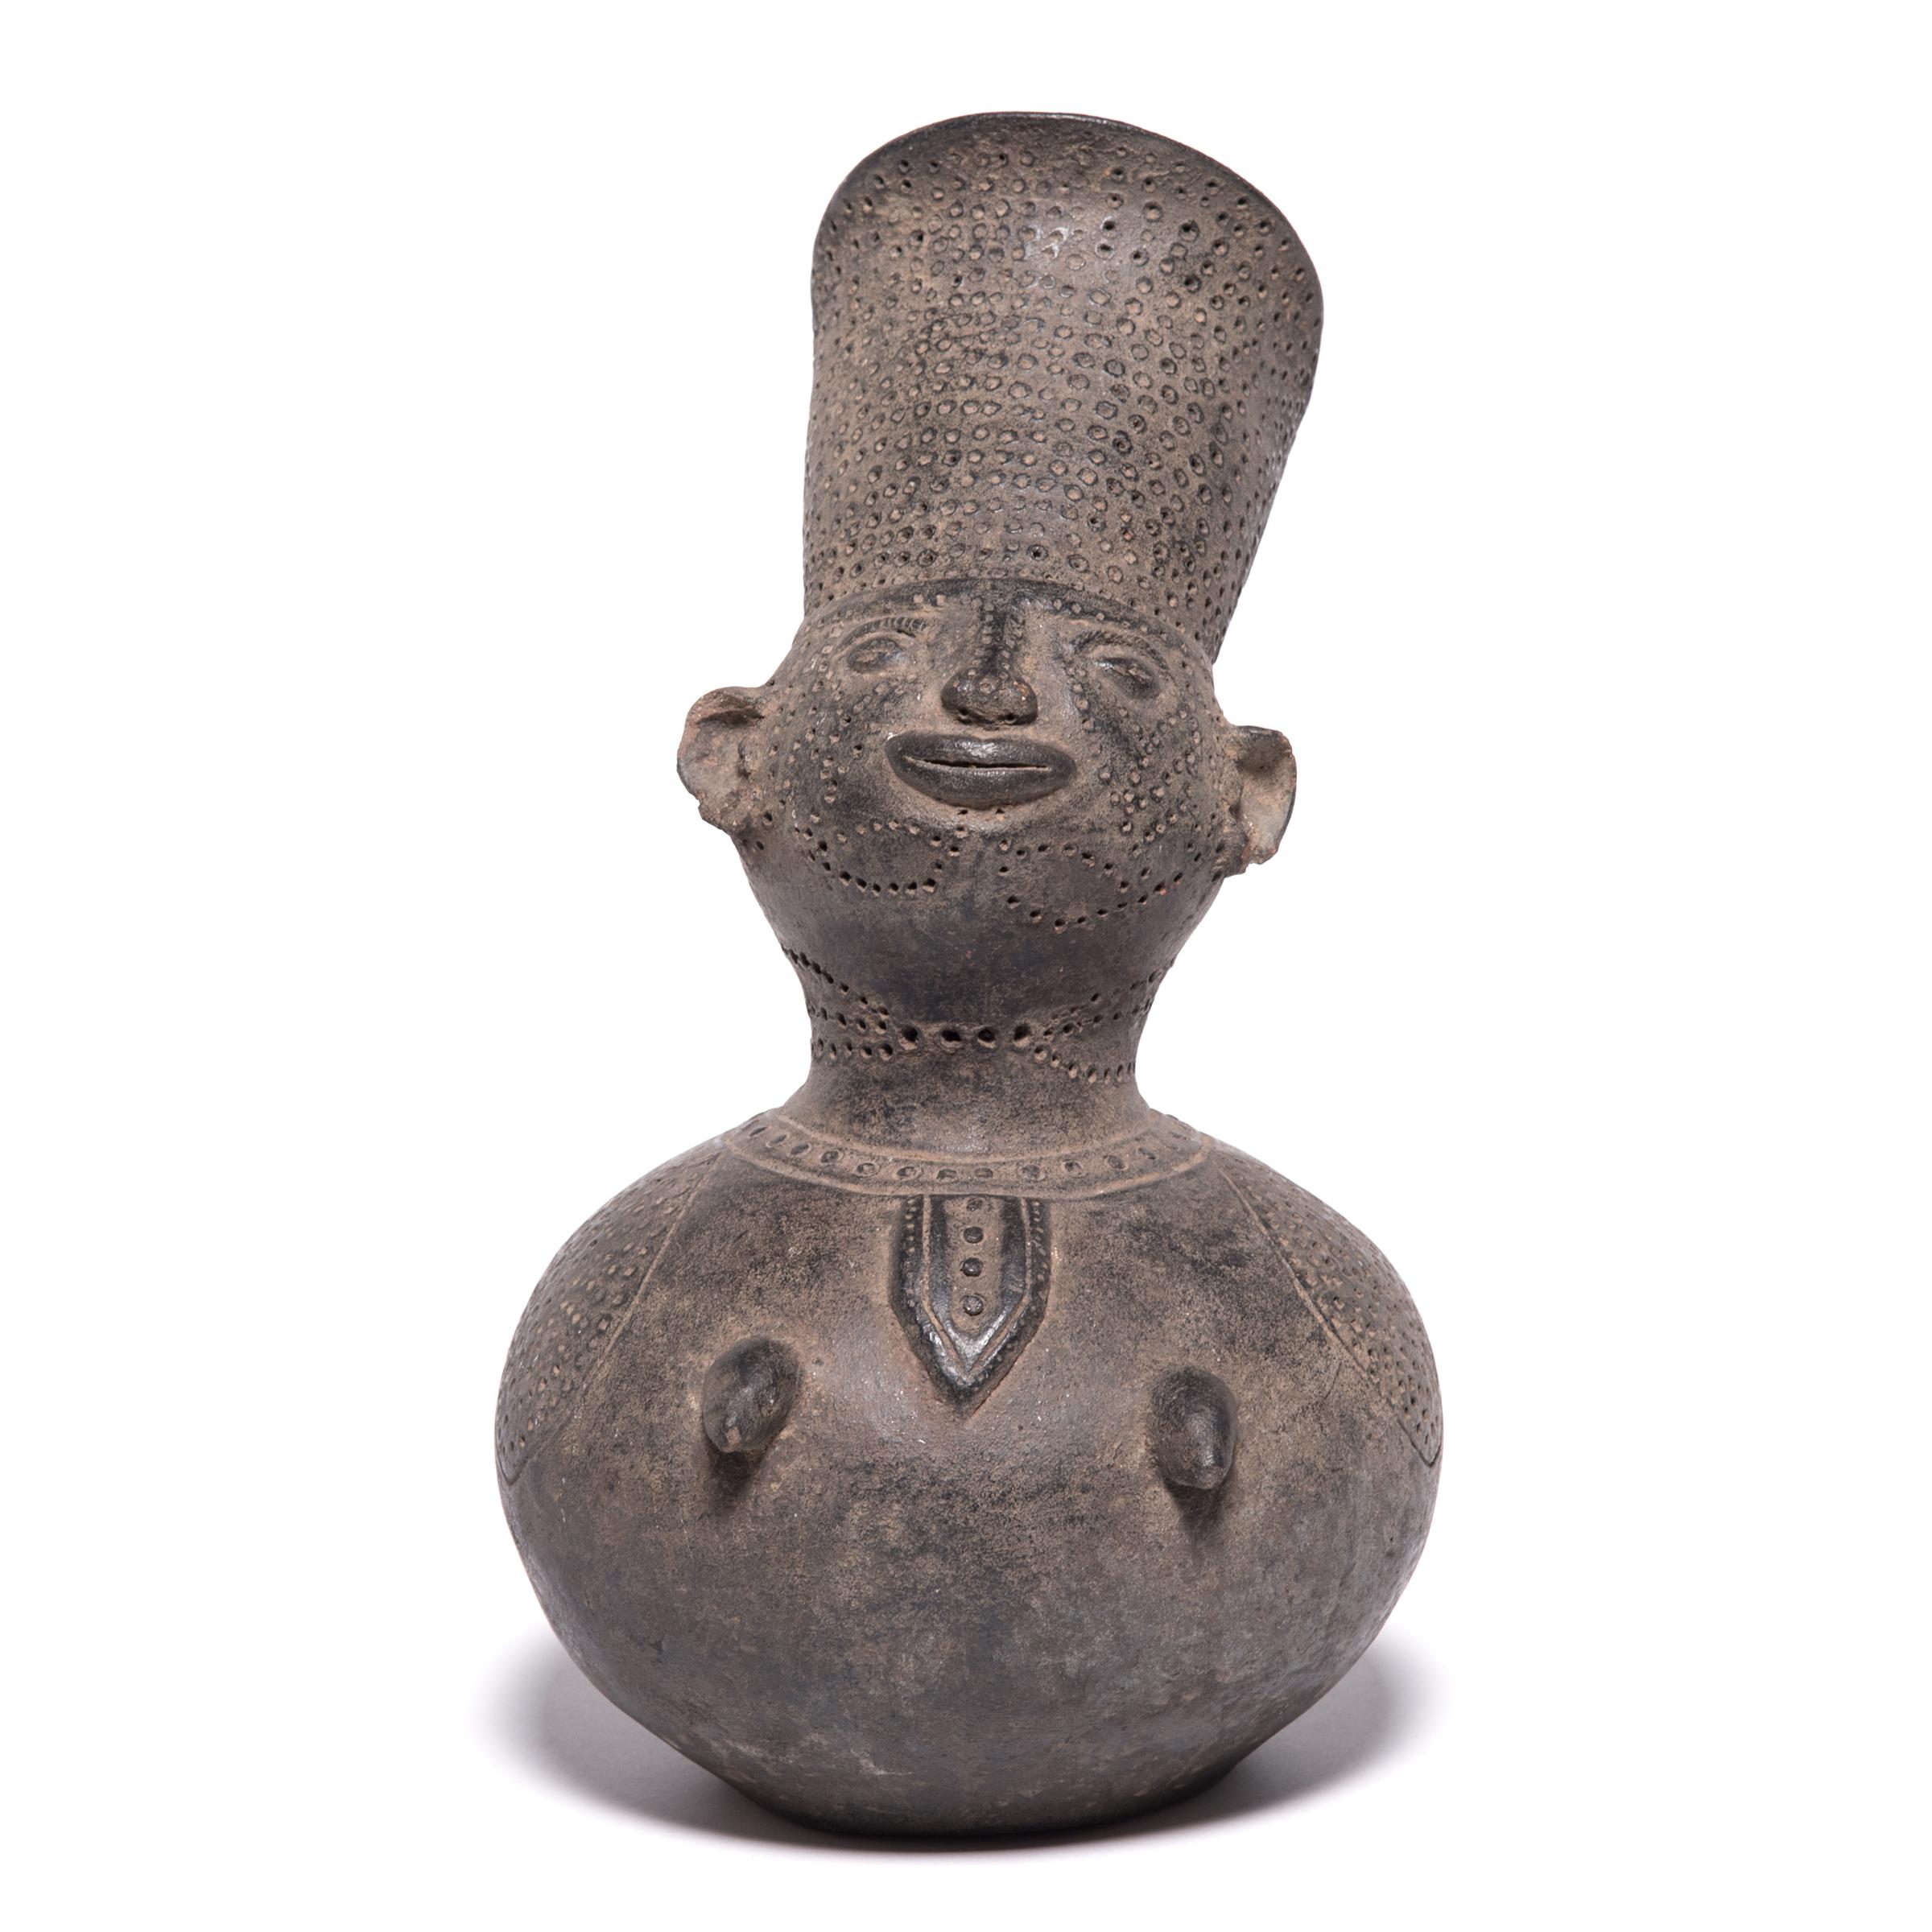 The Mangbetu people focused on highly realistic art forms. This ceremonial jug seamlessly transitions between figurative and abstract forms, from the spout formed to look like hair, to the expressive face, and down to the rounded, gourd-shaped base.